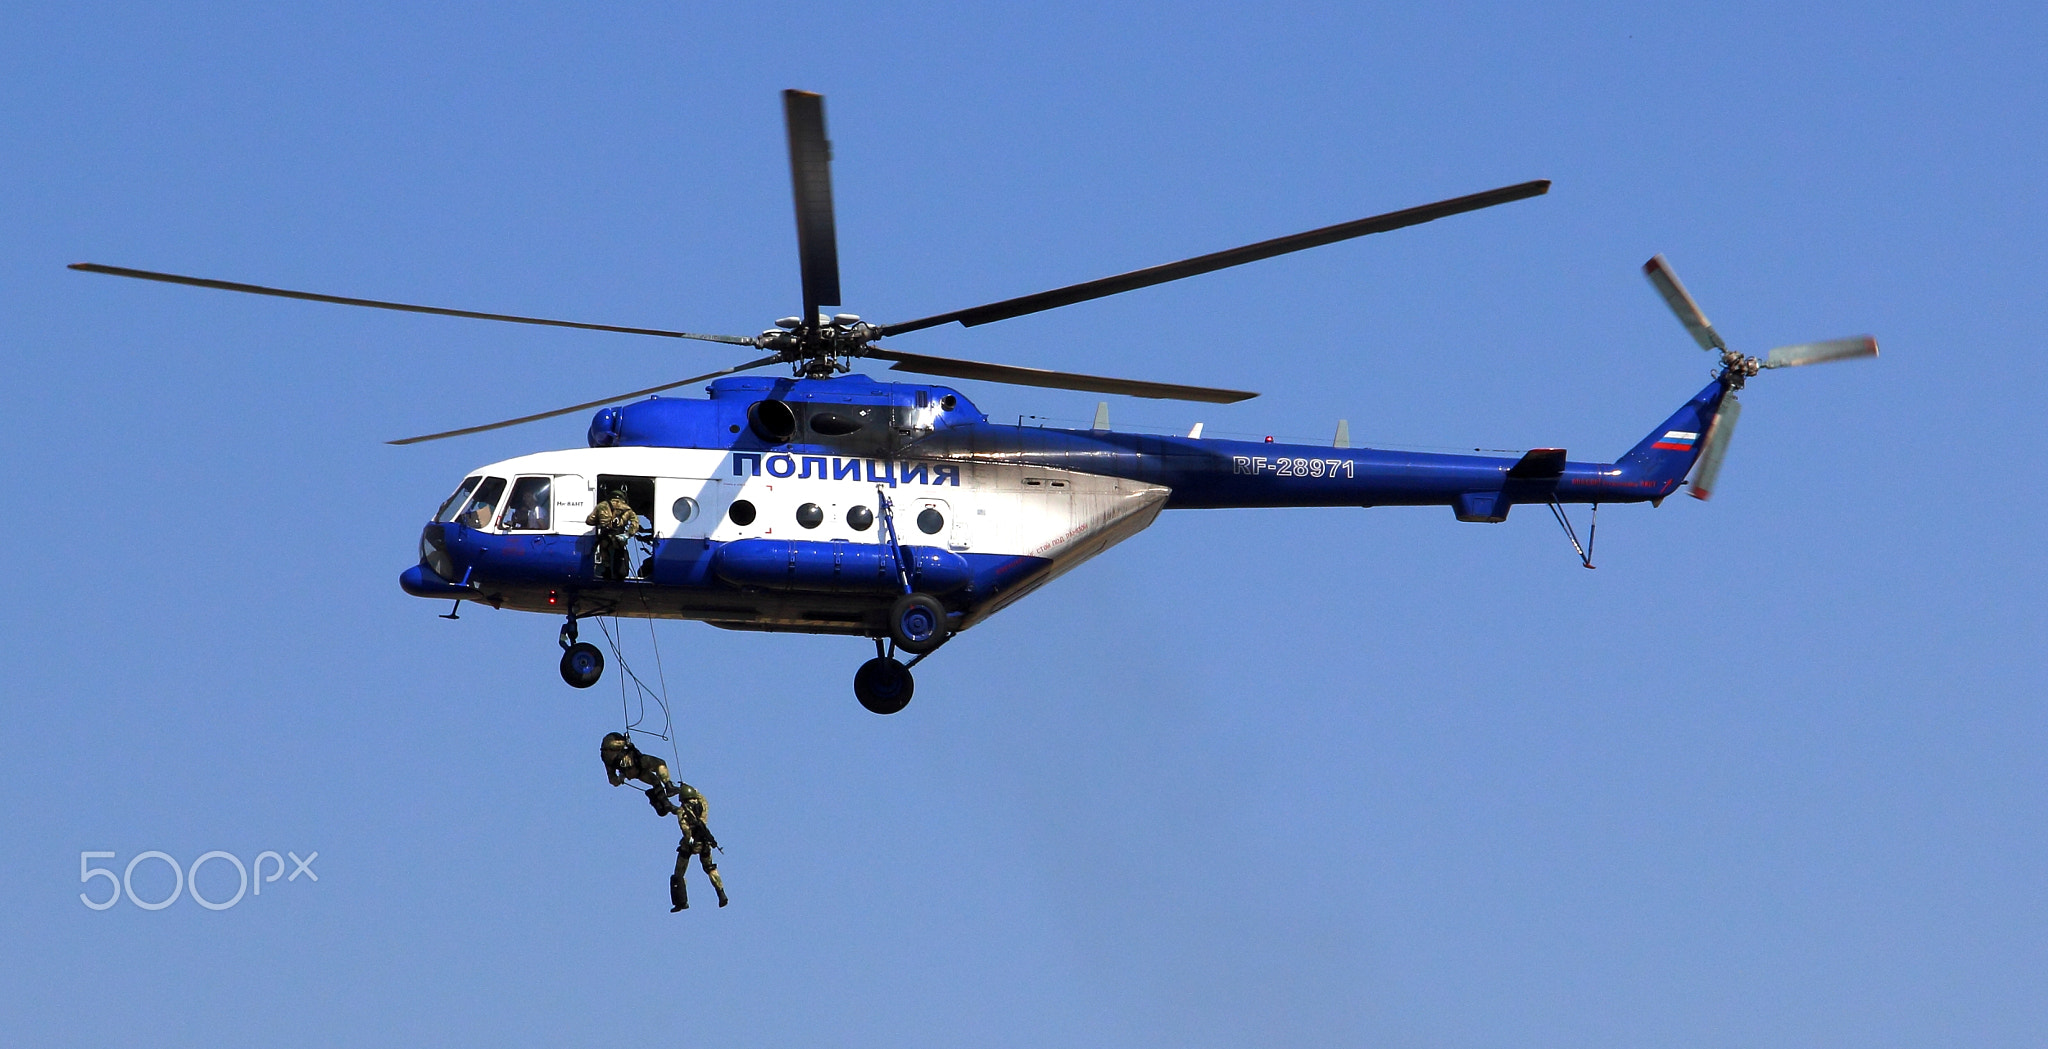 the landing of the police helicopter